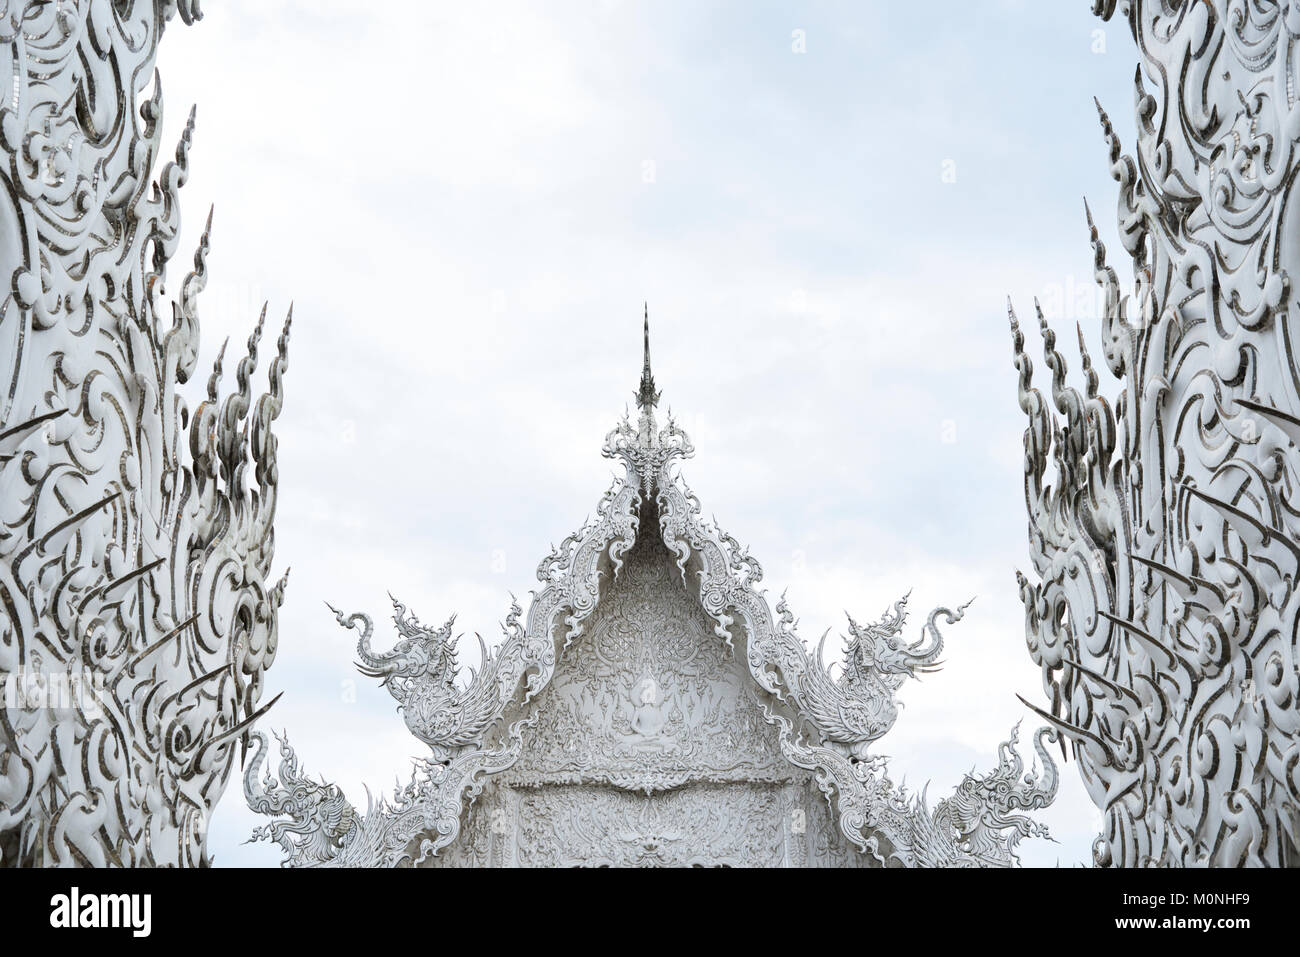 Details of Wat Rong Khun or White temple, buddhist temple, Chiang Rai, Thailand. Stock Photo